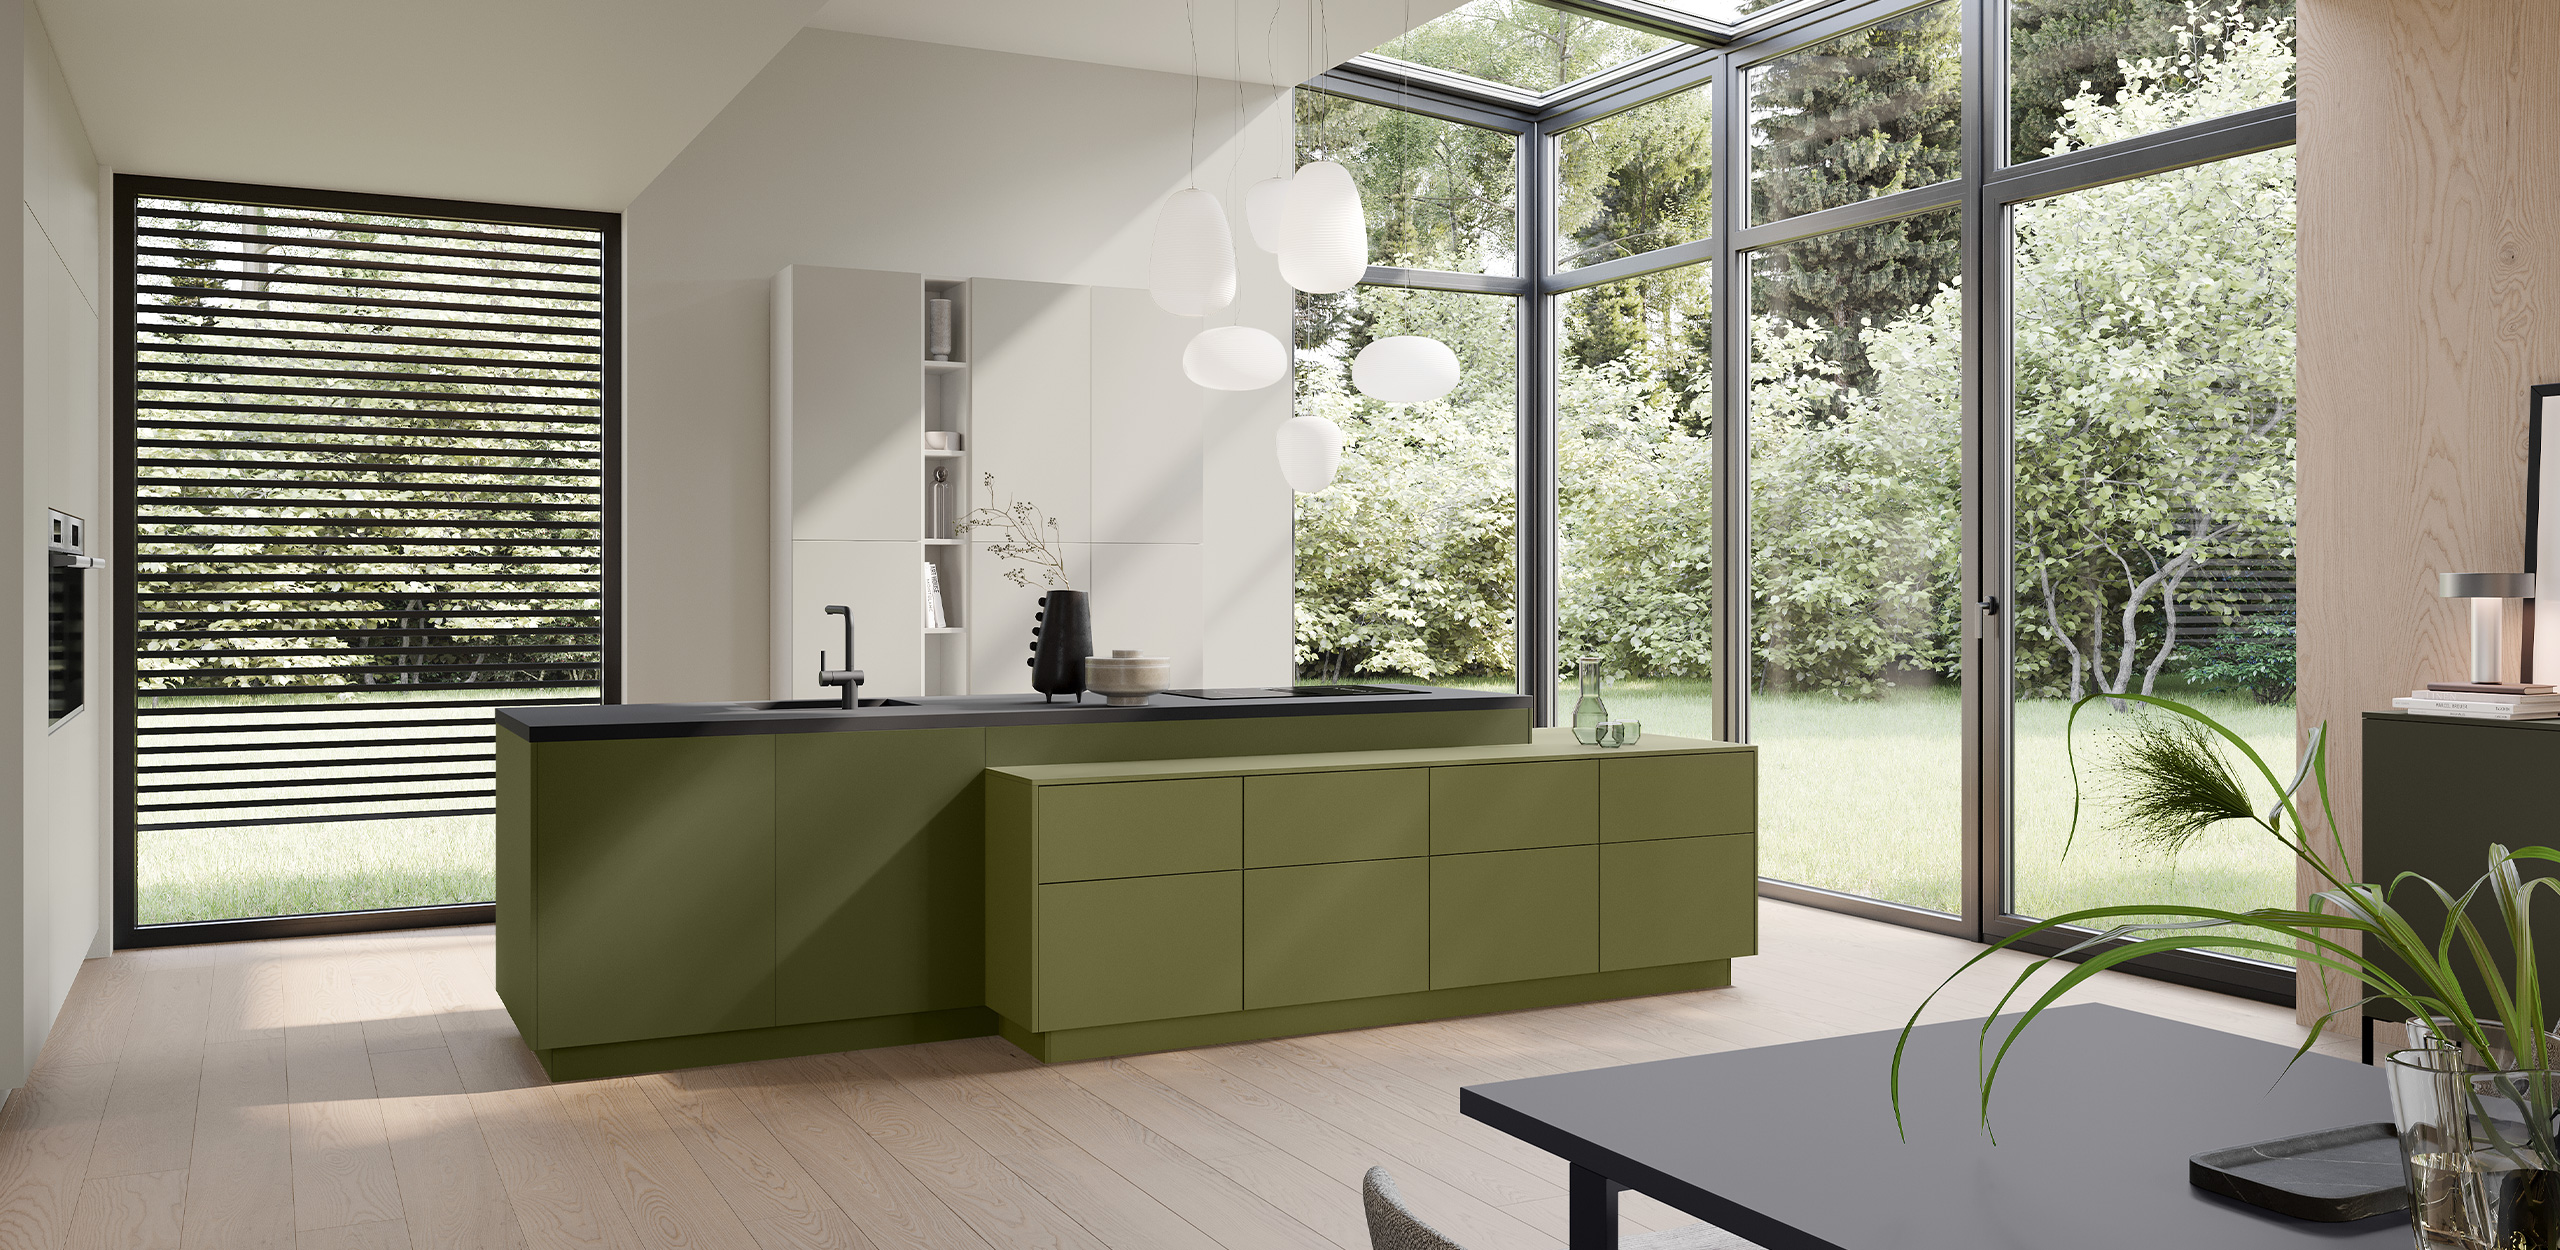 Front view olive green asymmetric over-corner kitchen 